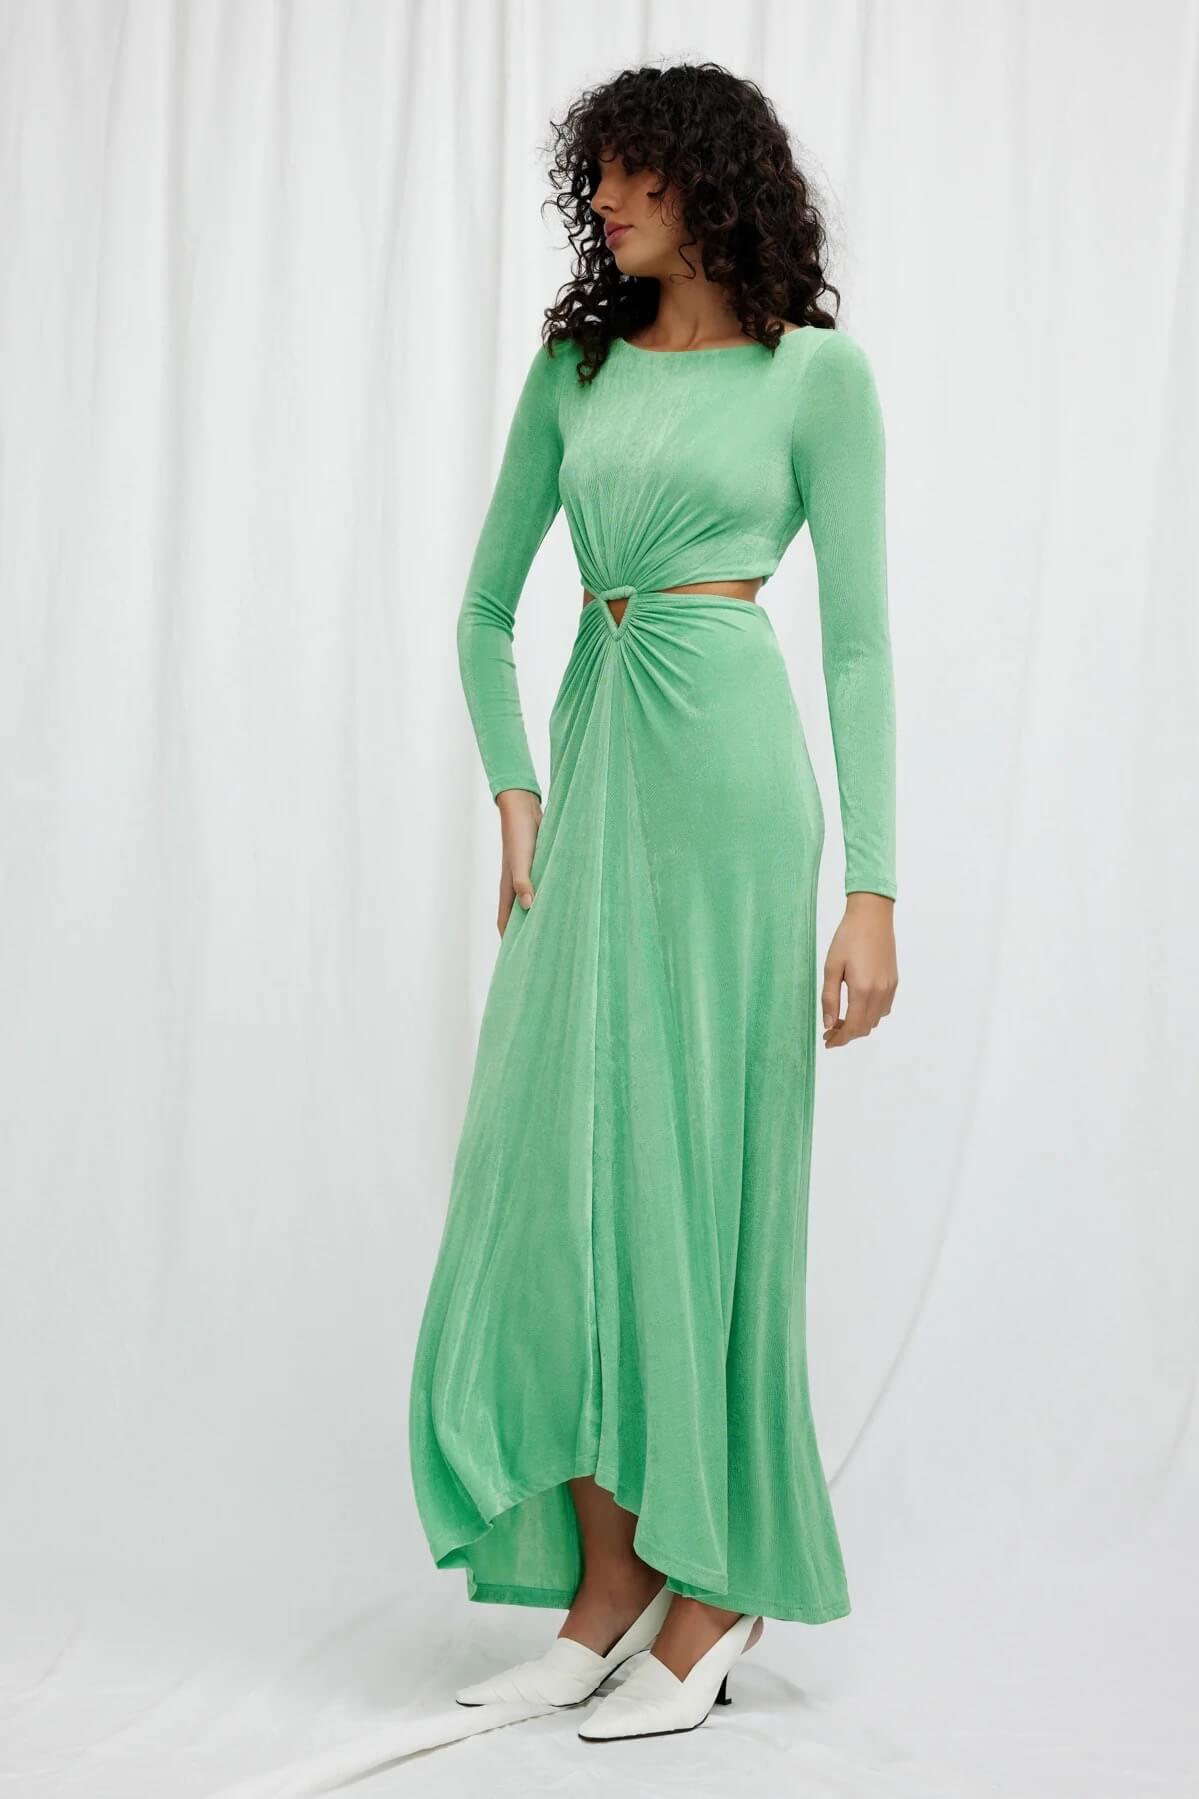 Lace Bodice Maxi Dress With Sleeves - Mint